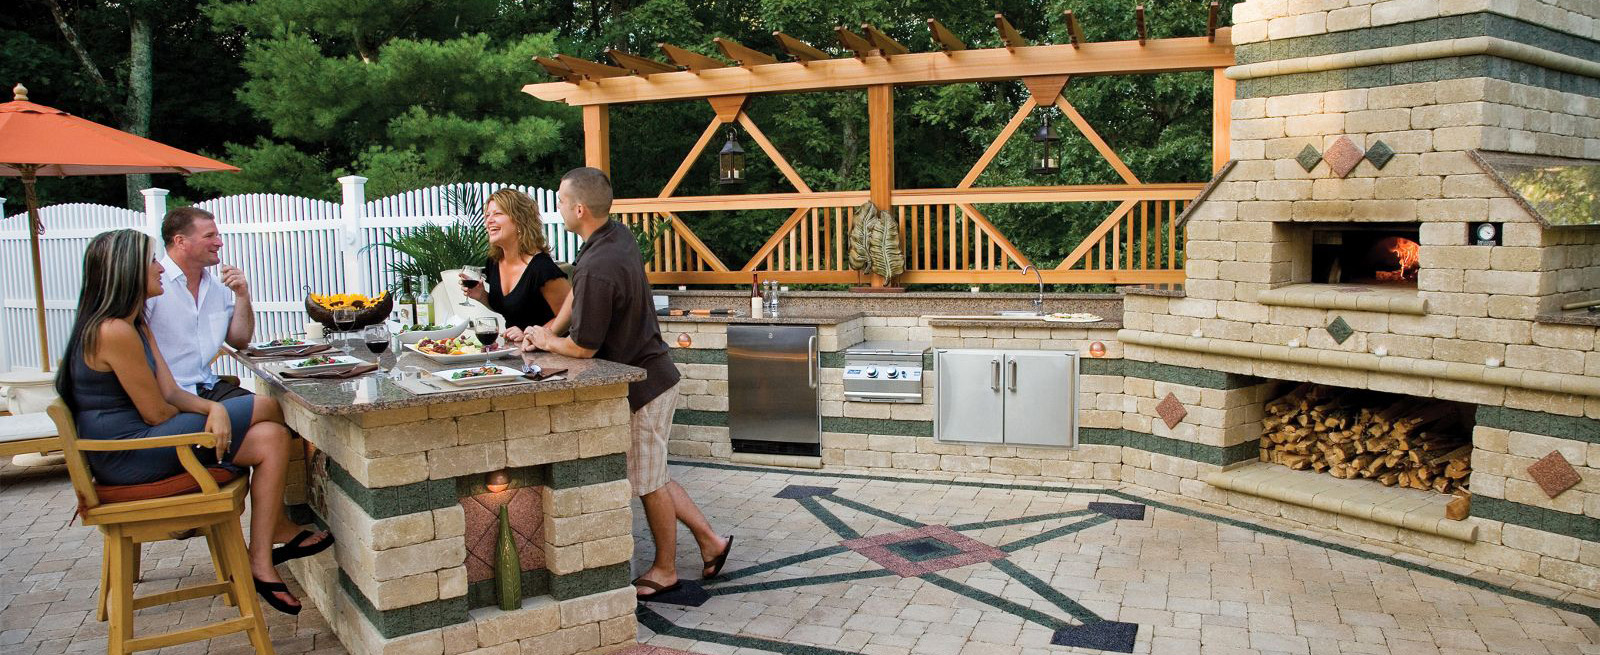 Why Hardscape Outdoor Kitchens May Be Best